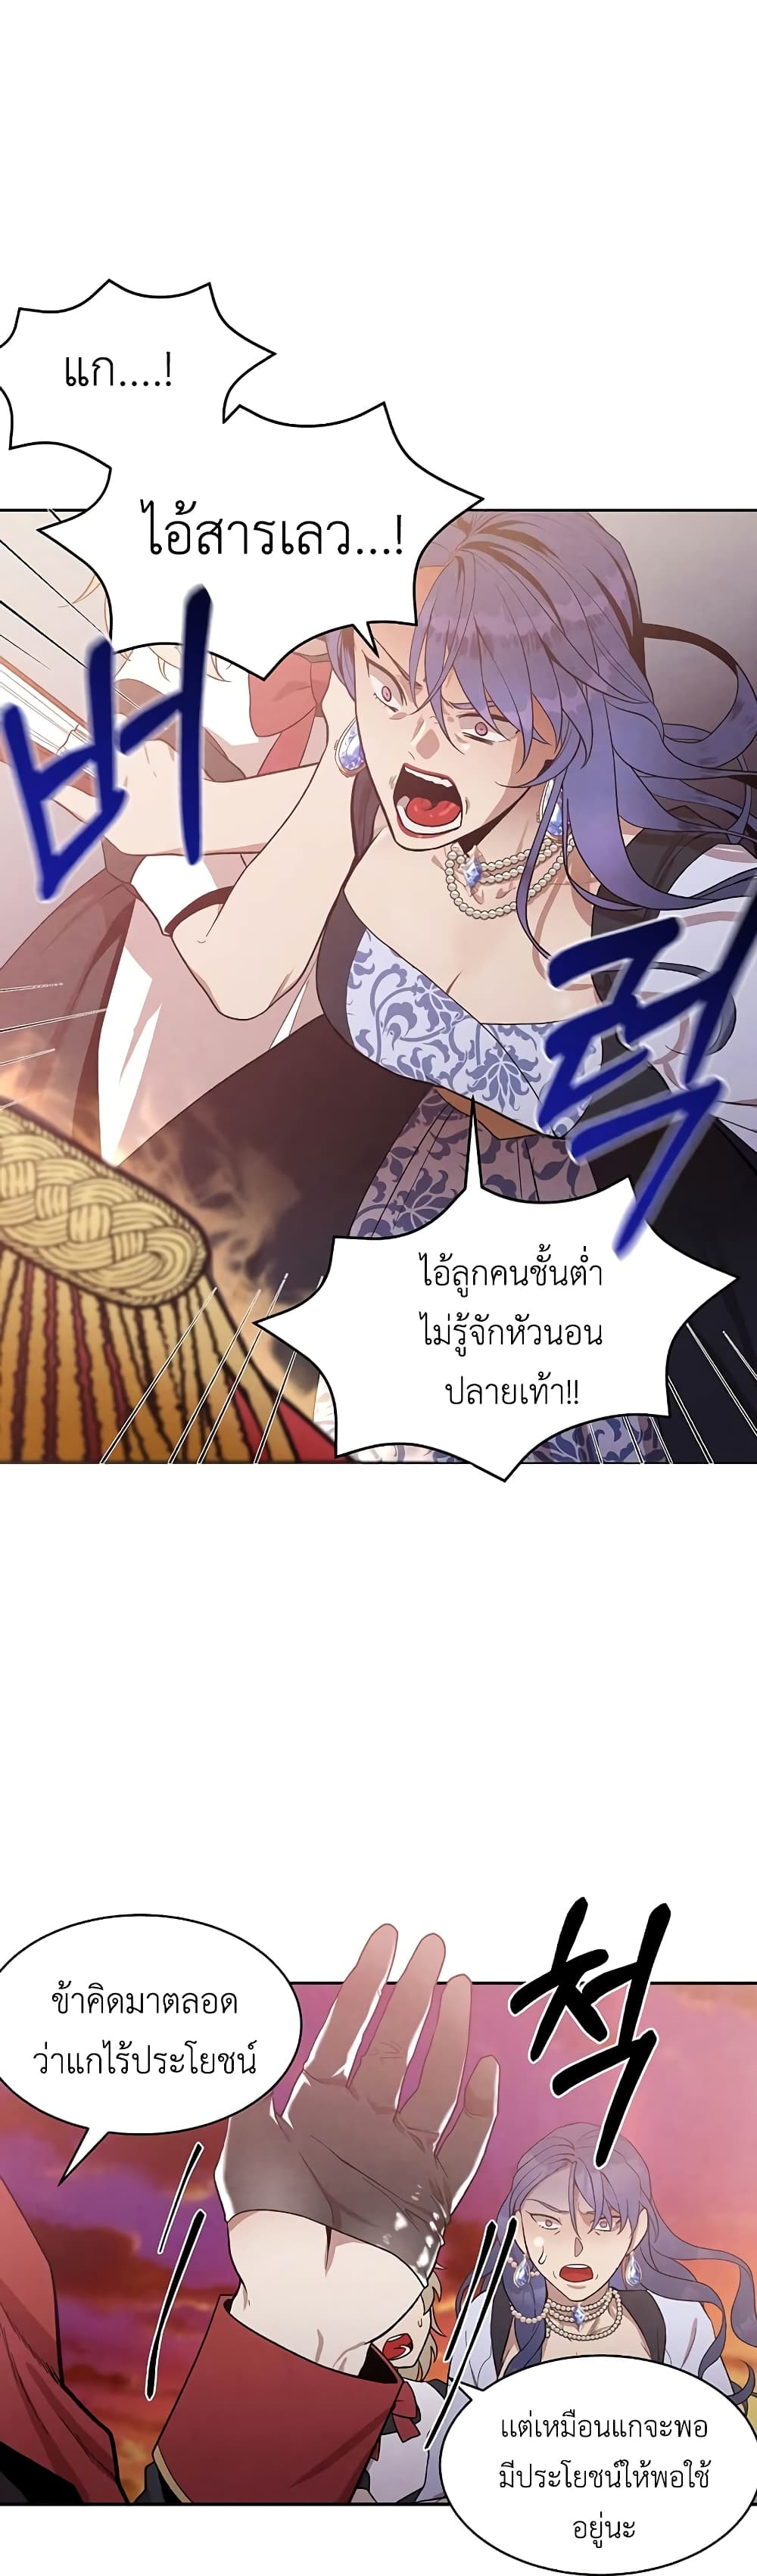 Legendary Youngest Son of the Marquis House 6 แปลไทย